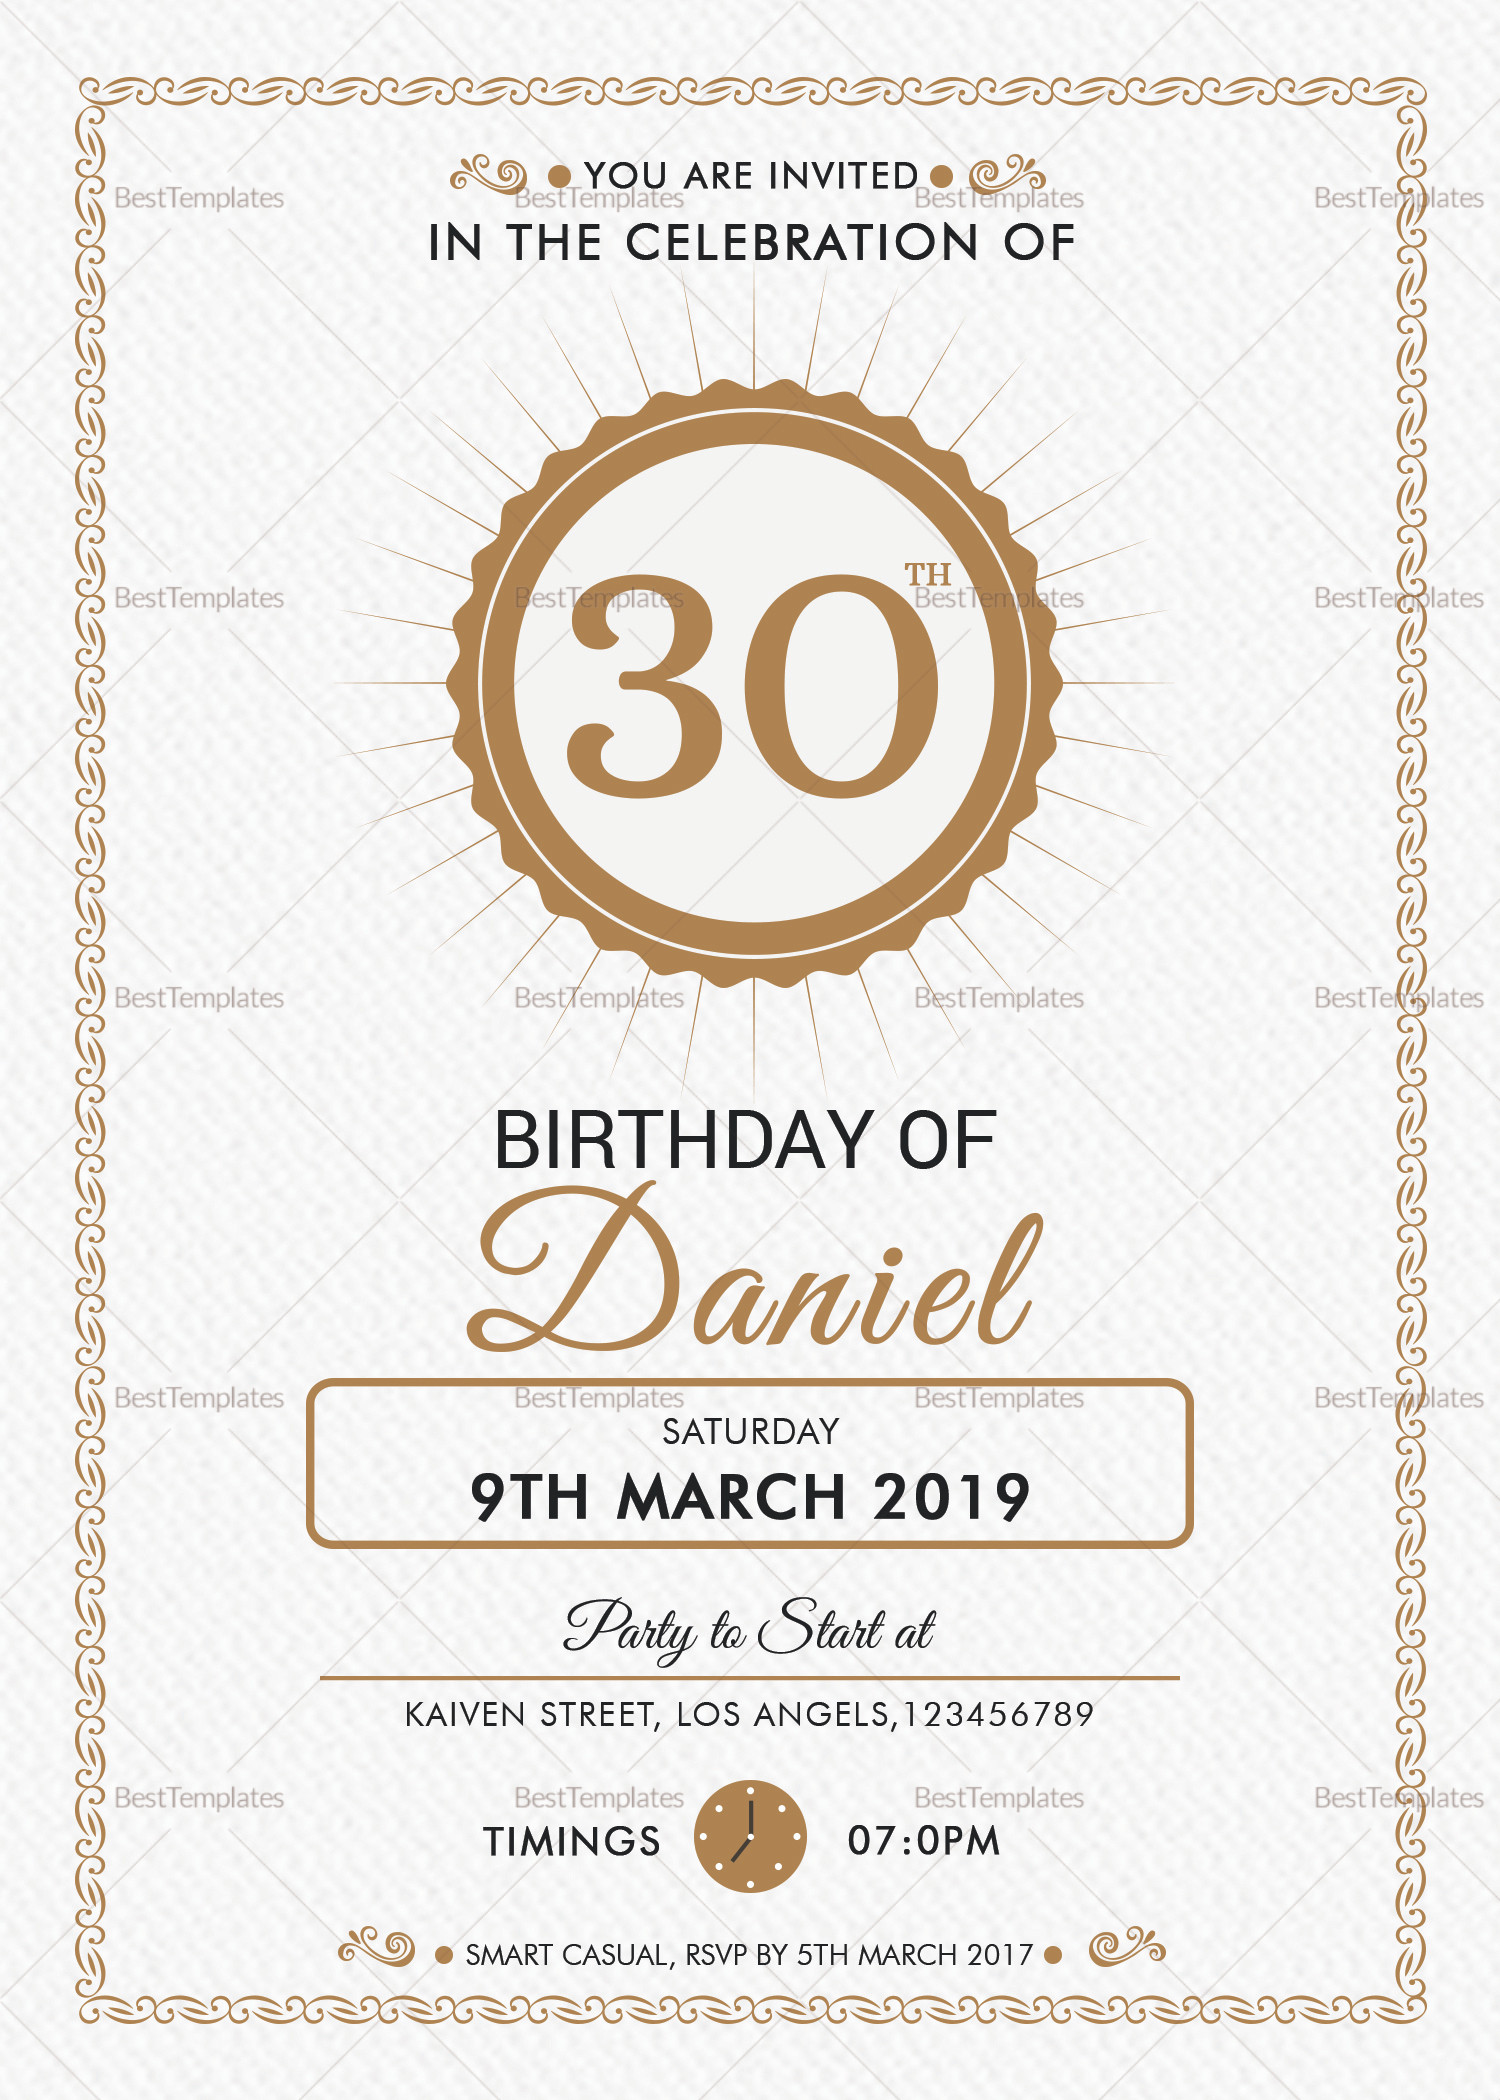 Birthday Party Invitation Template Word
 Adult Birthday Party Invitation Design Template in Word